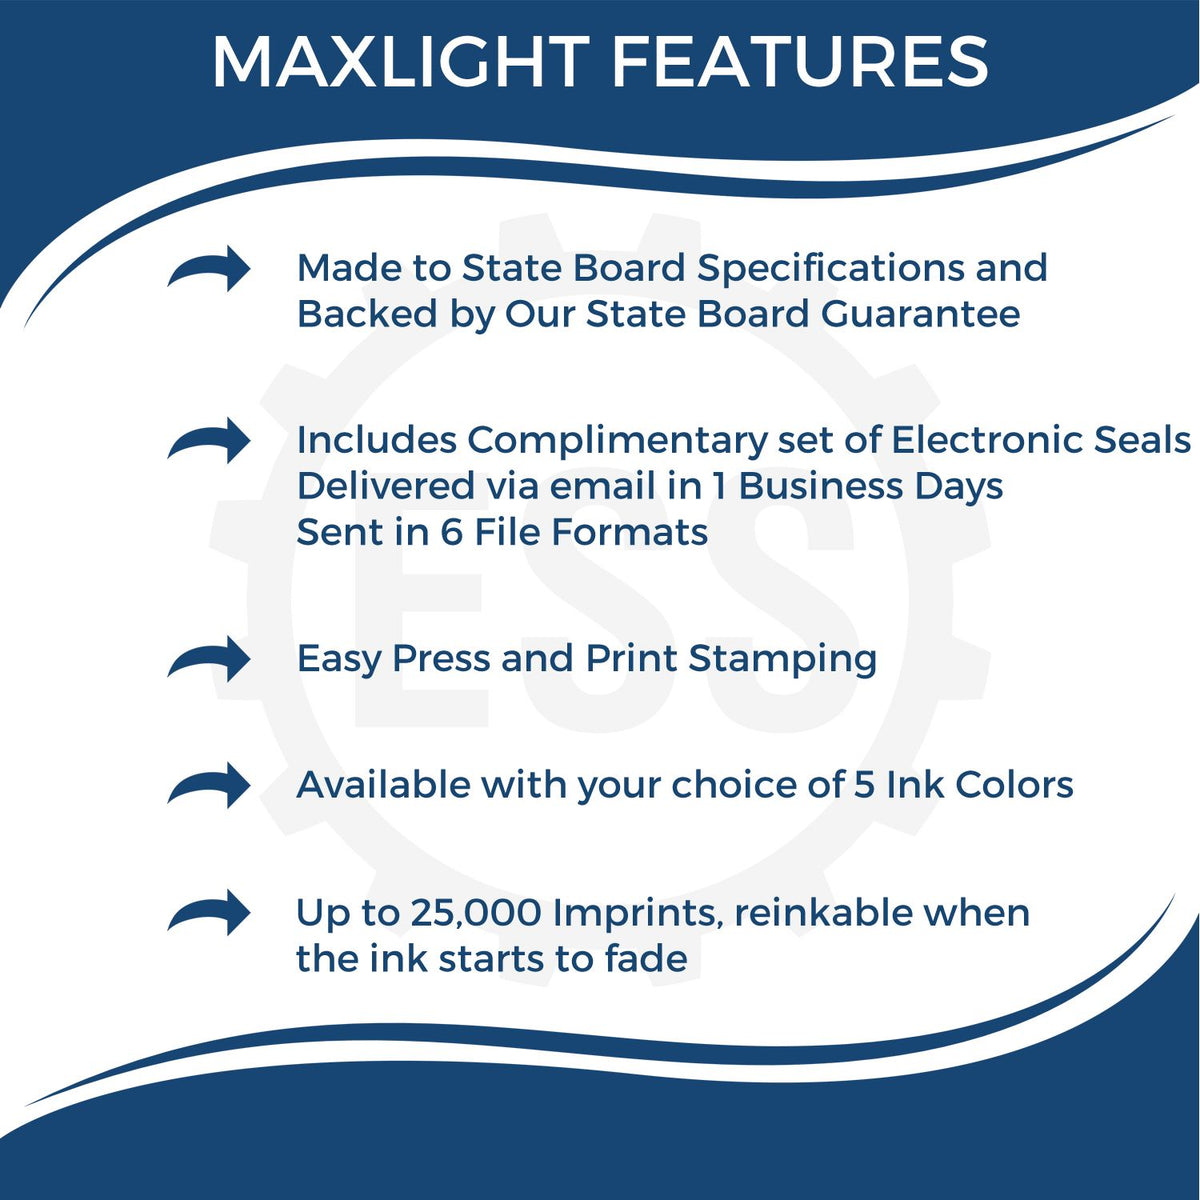 A picture of an infographic highlighting the selling points for the Premium MaxLight Pre-Inked California Engineering Stamp